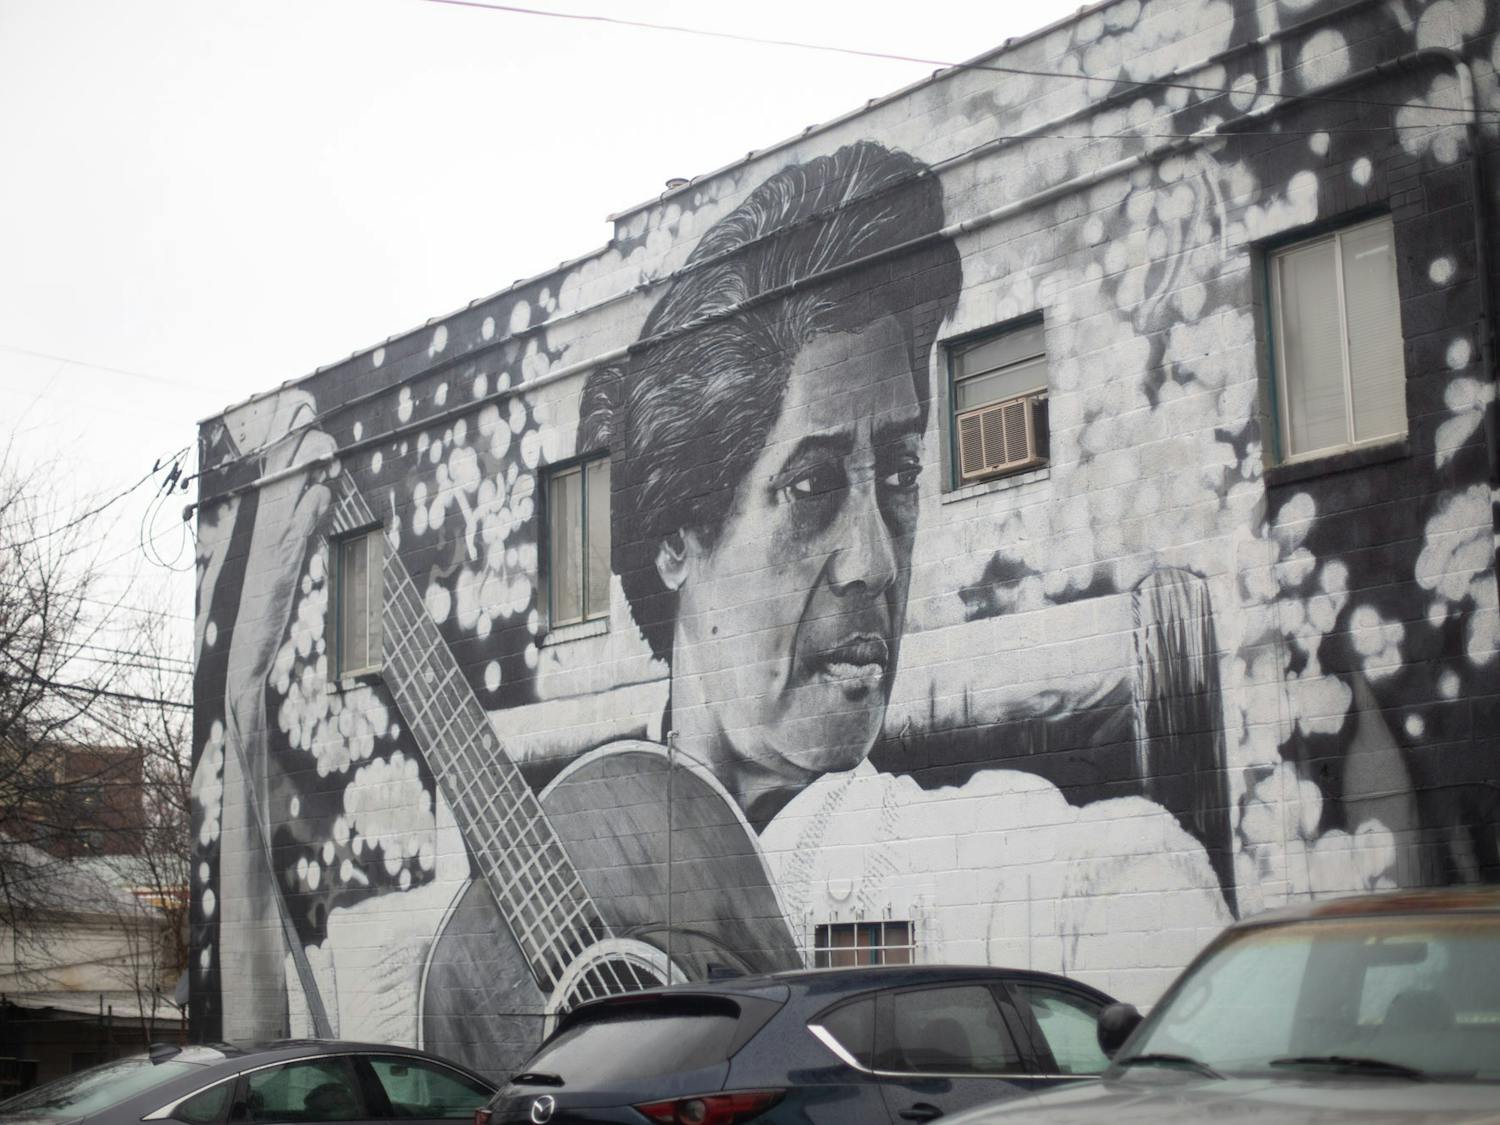 A mural of Elizabeth Cotten at 111 North Merritt Mill Road in Carrboro on Feb. 11, 2021